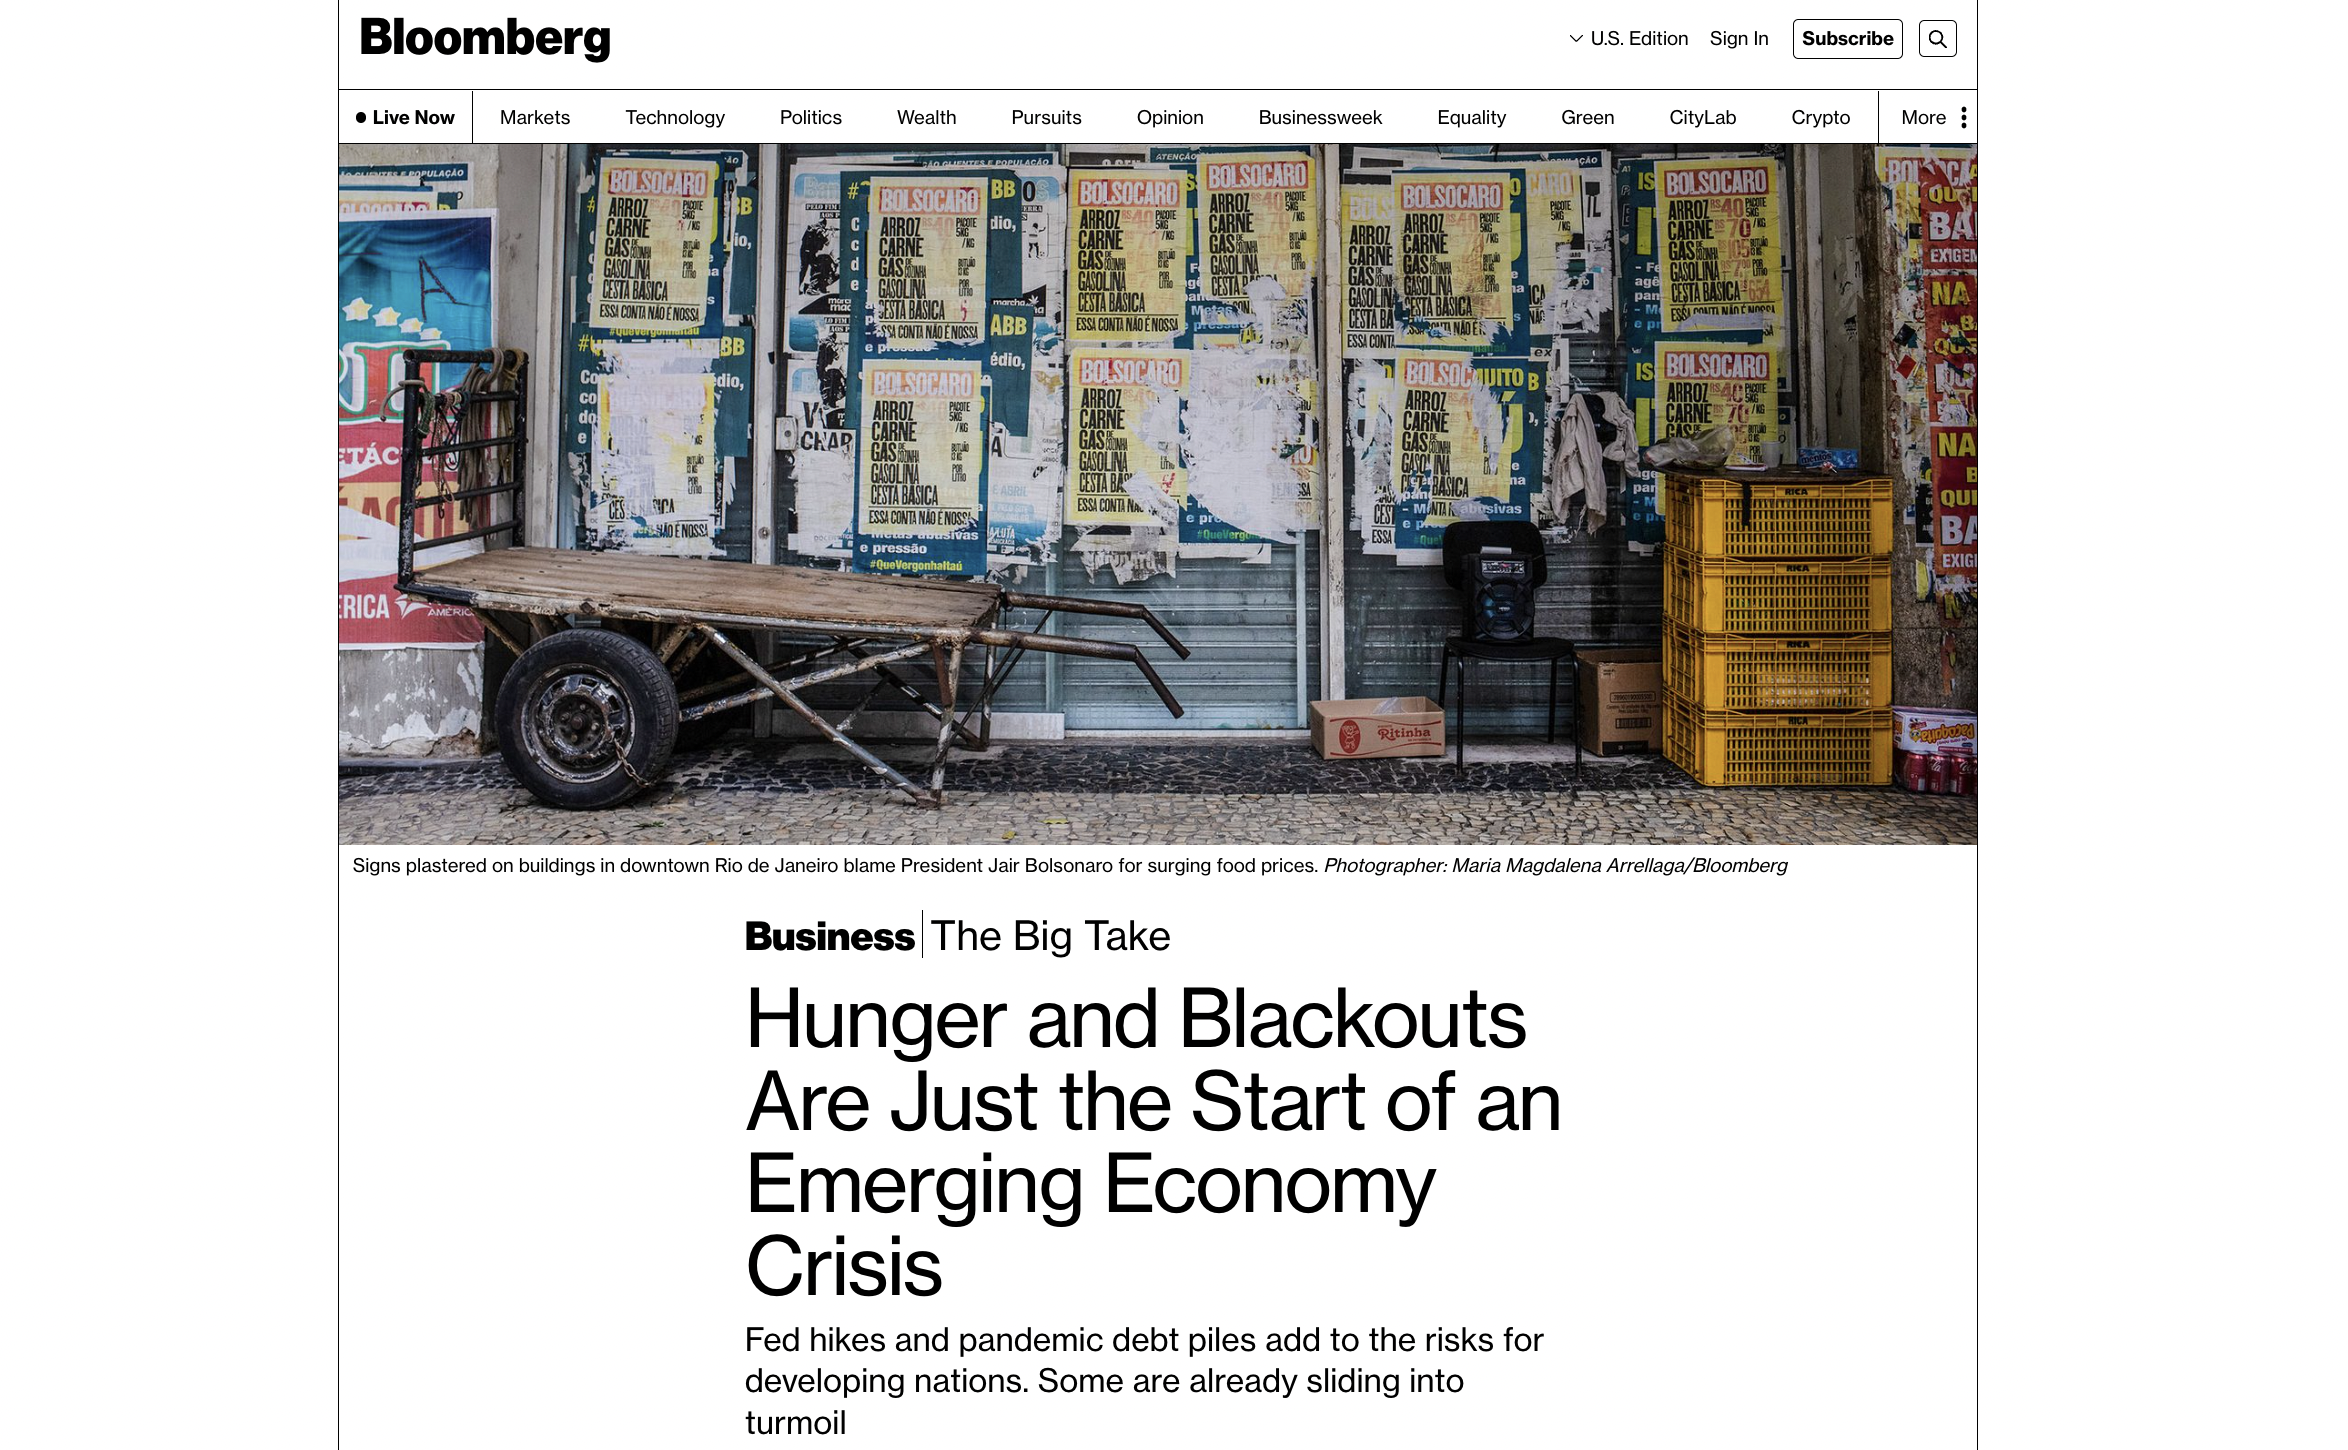 For Bloomberg: "Hunger and Blackouts Are Just the Start of an Emerging Economy Crisis"